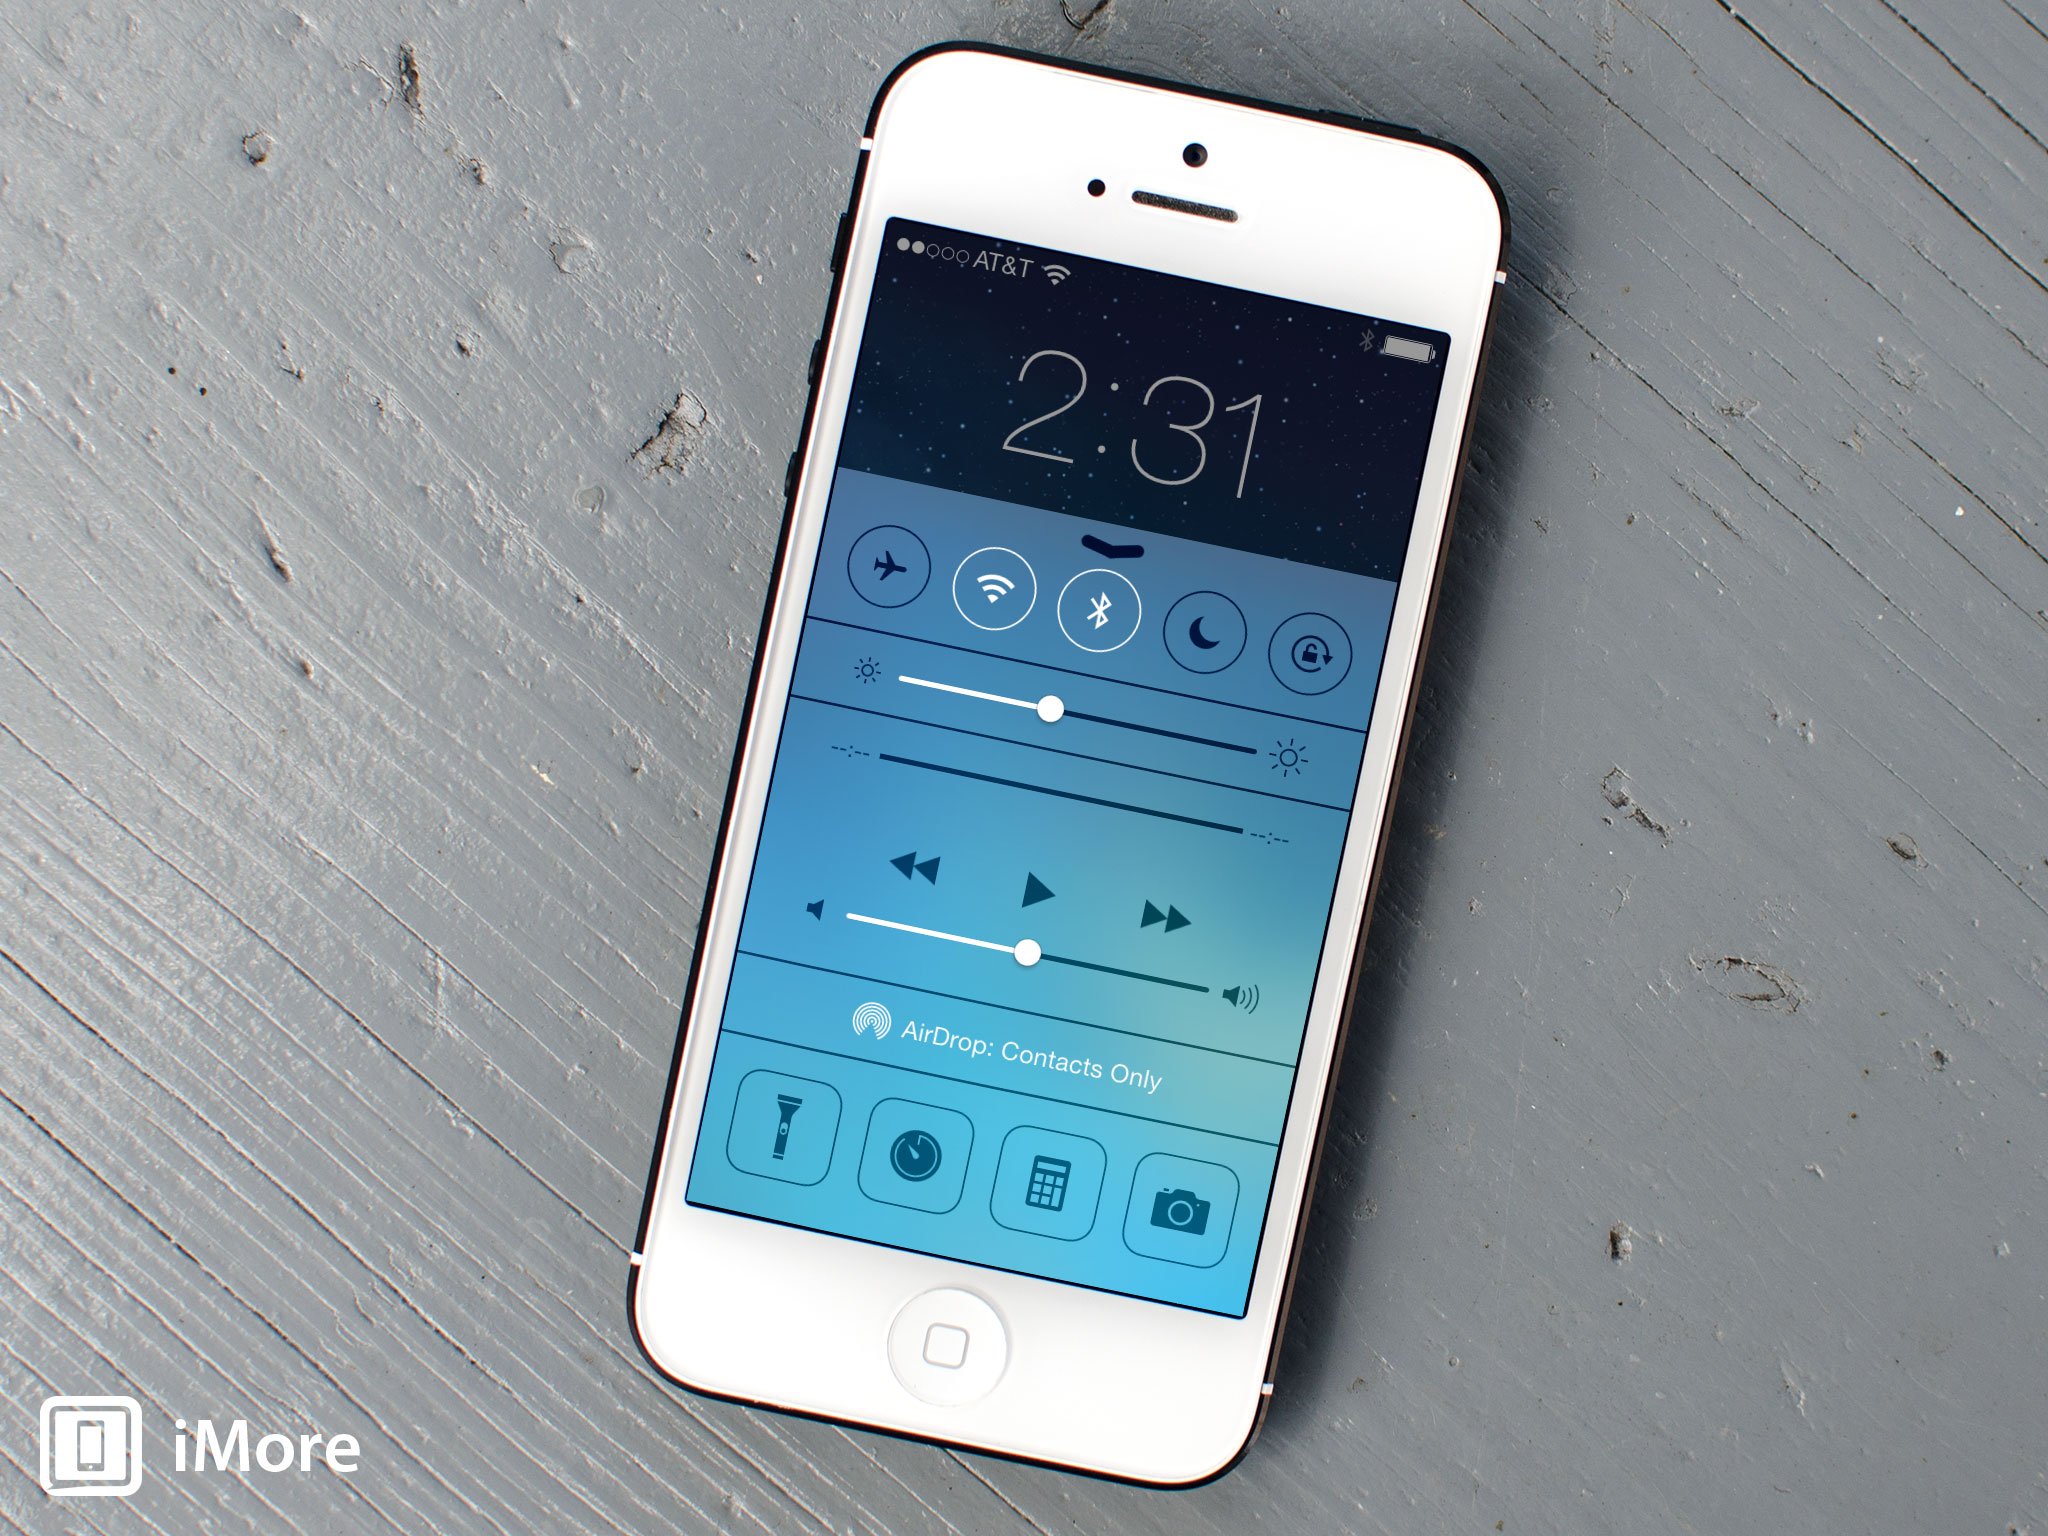 How to access and start using iOS 7 Control Center